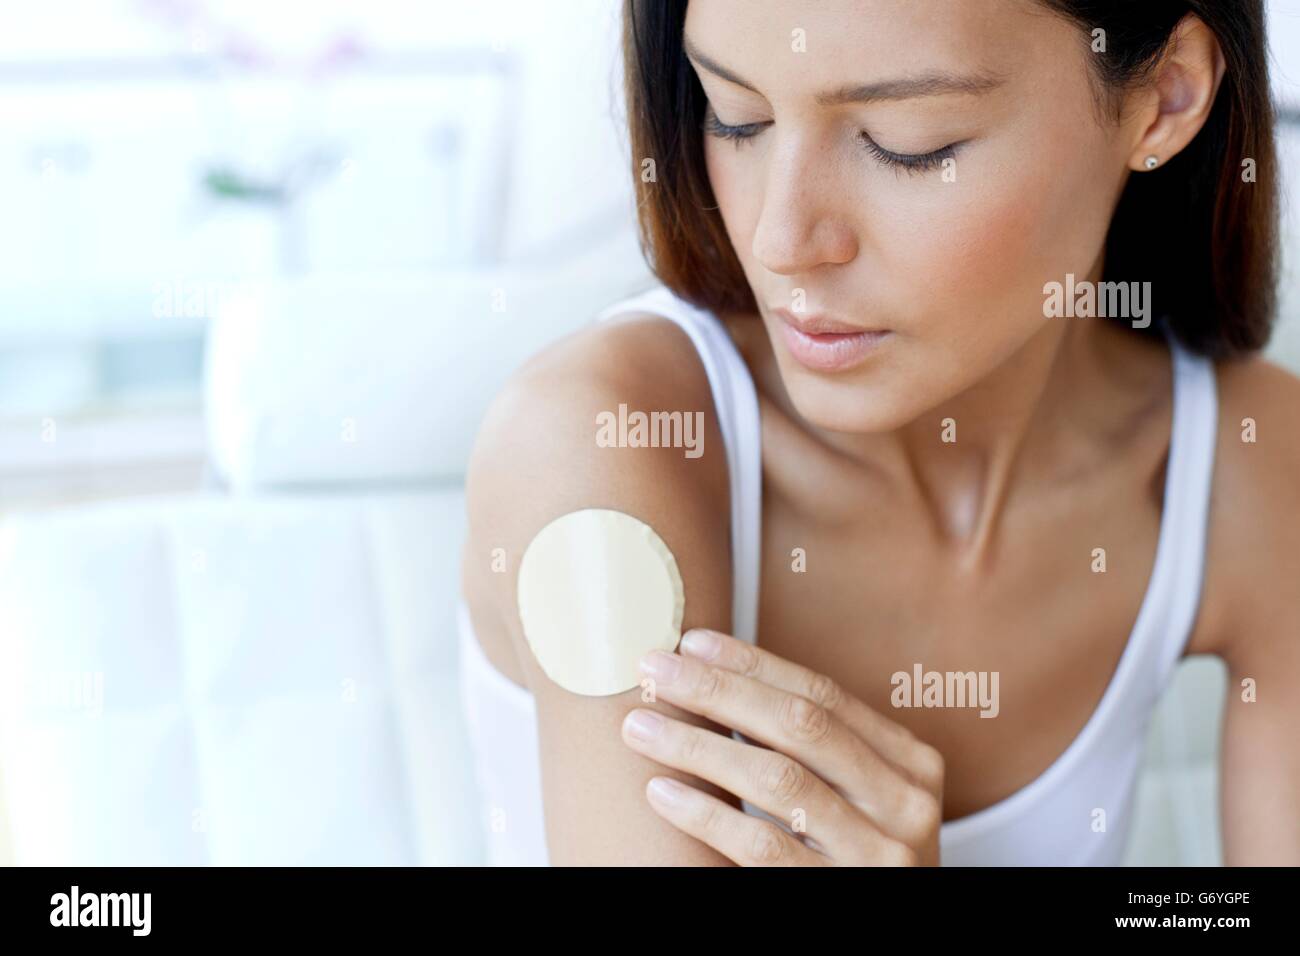 MODEL RELEASED. Young woman wearing a nicotine patch on her arm. Stock Photo